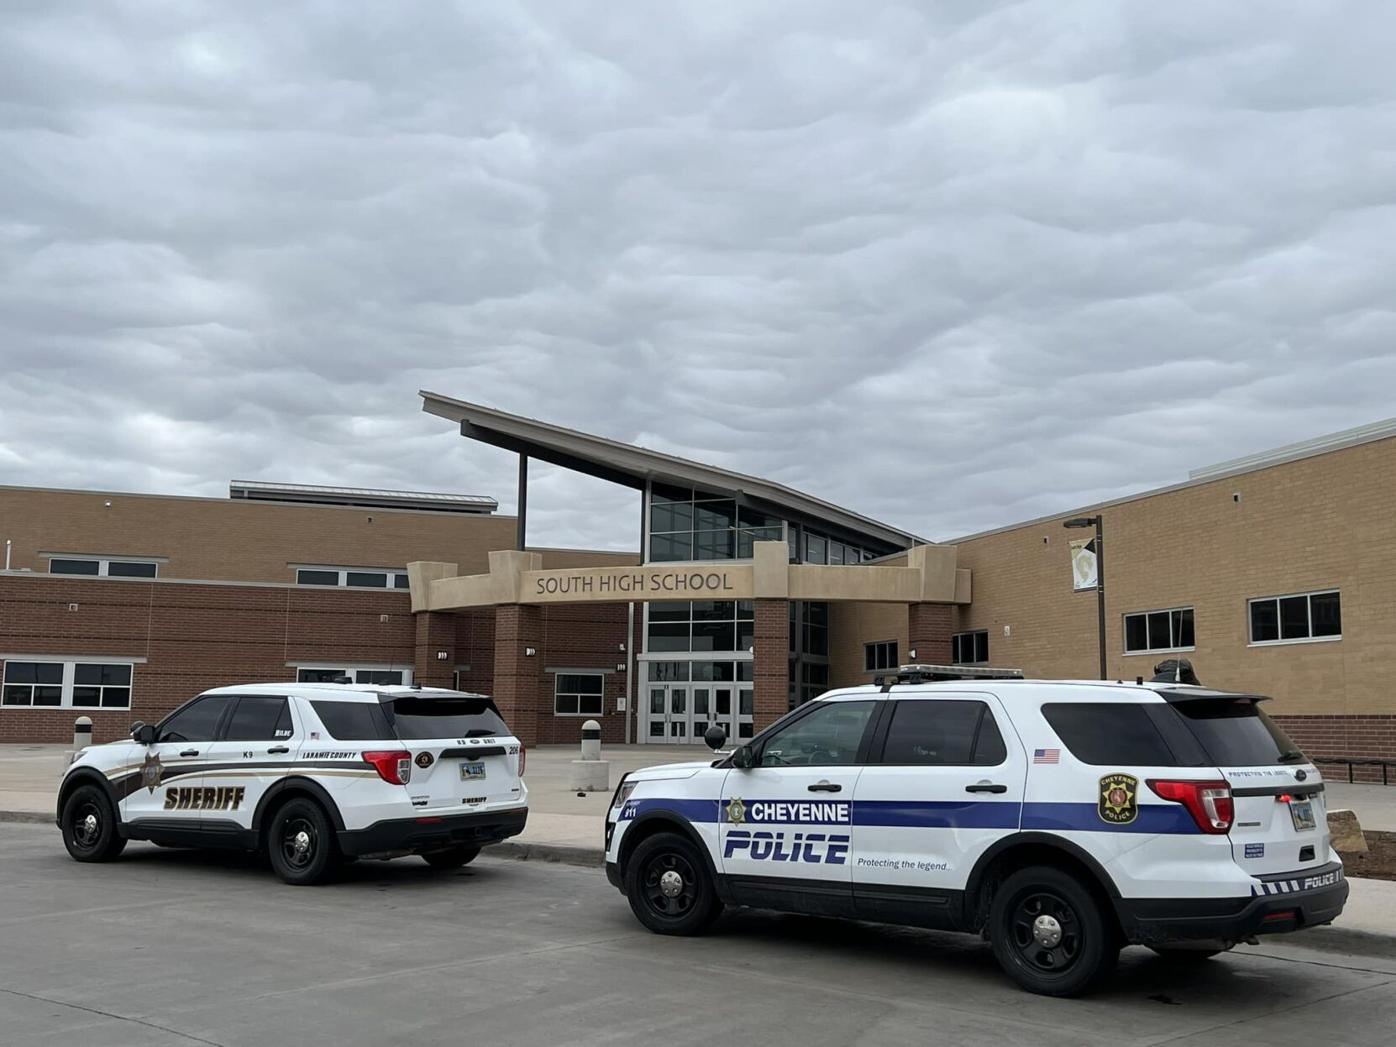 False active shooter reports made at multiple Texas schools